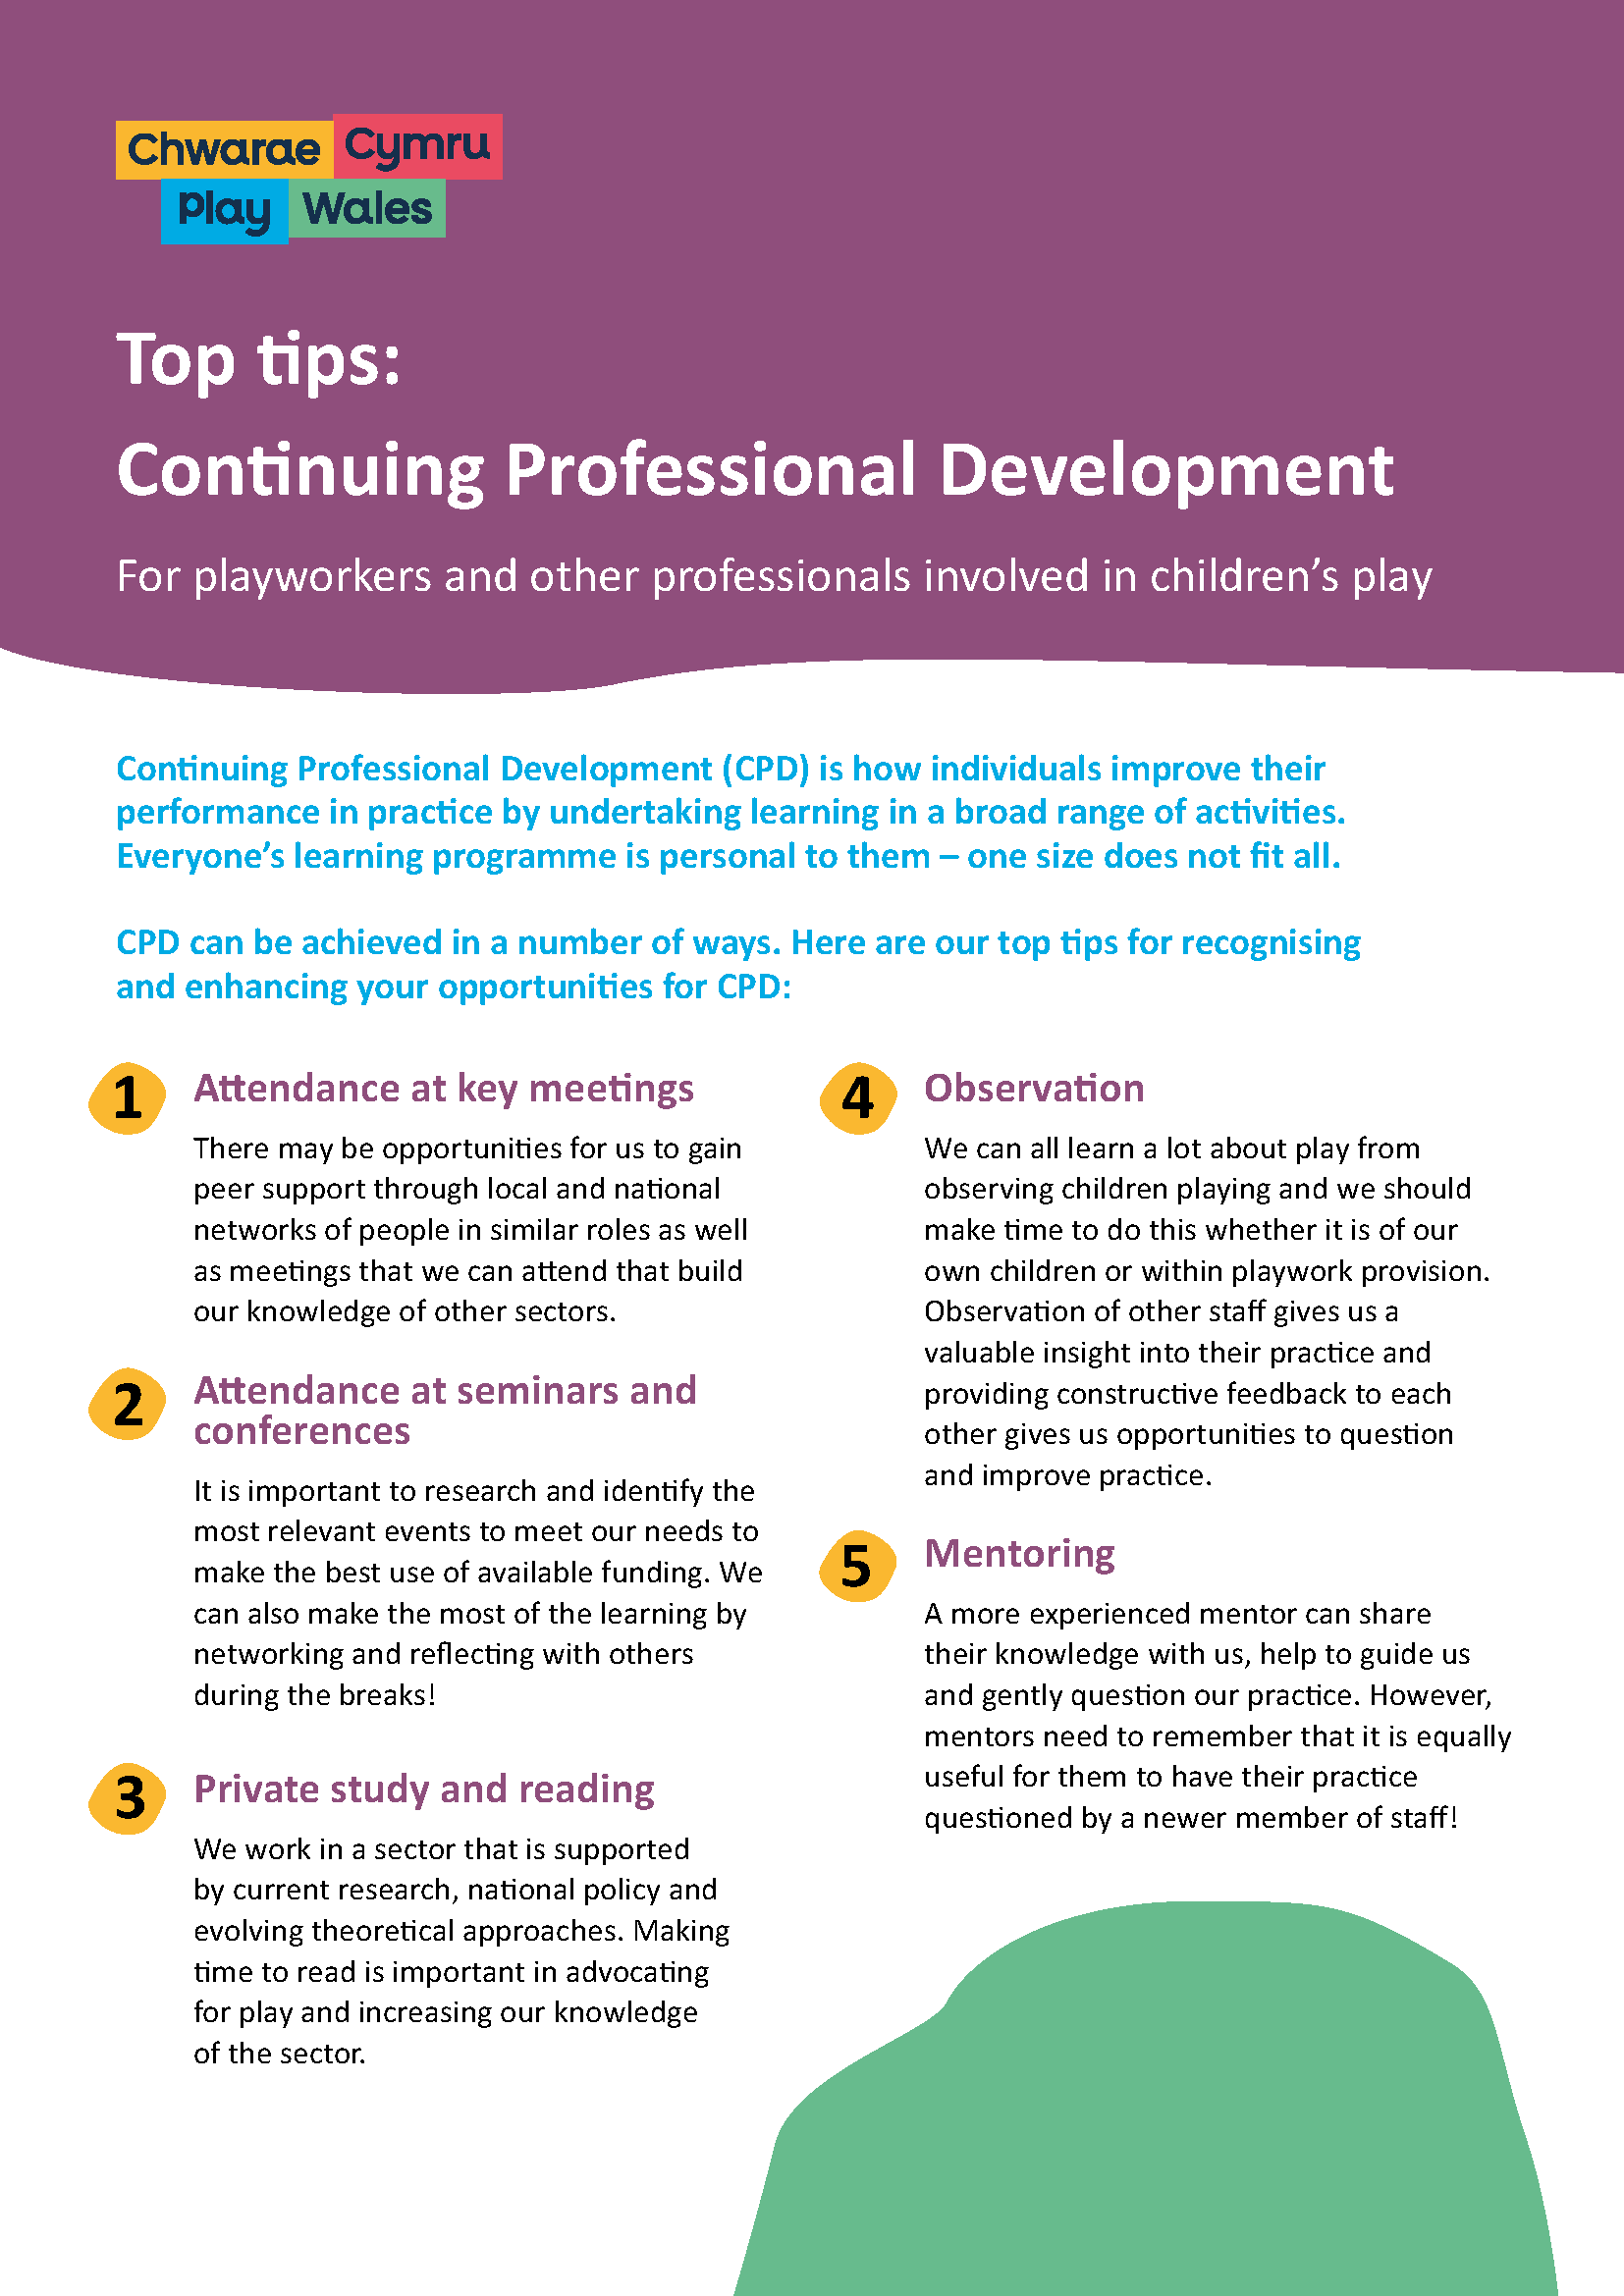 Top tips: Continuing Professional Development